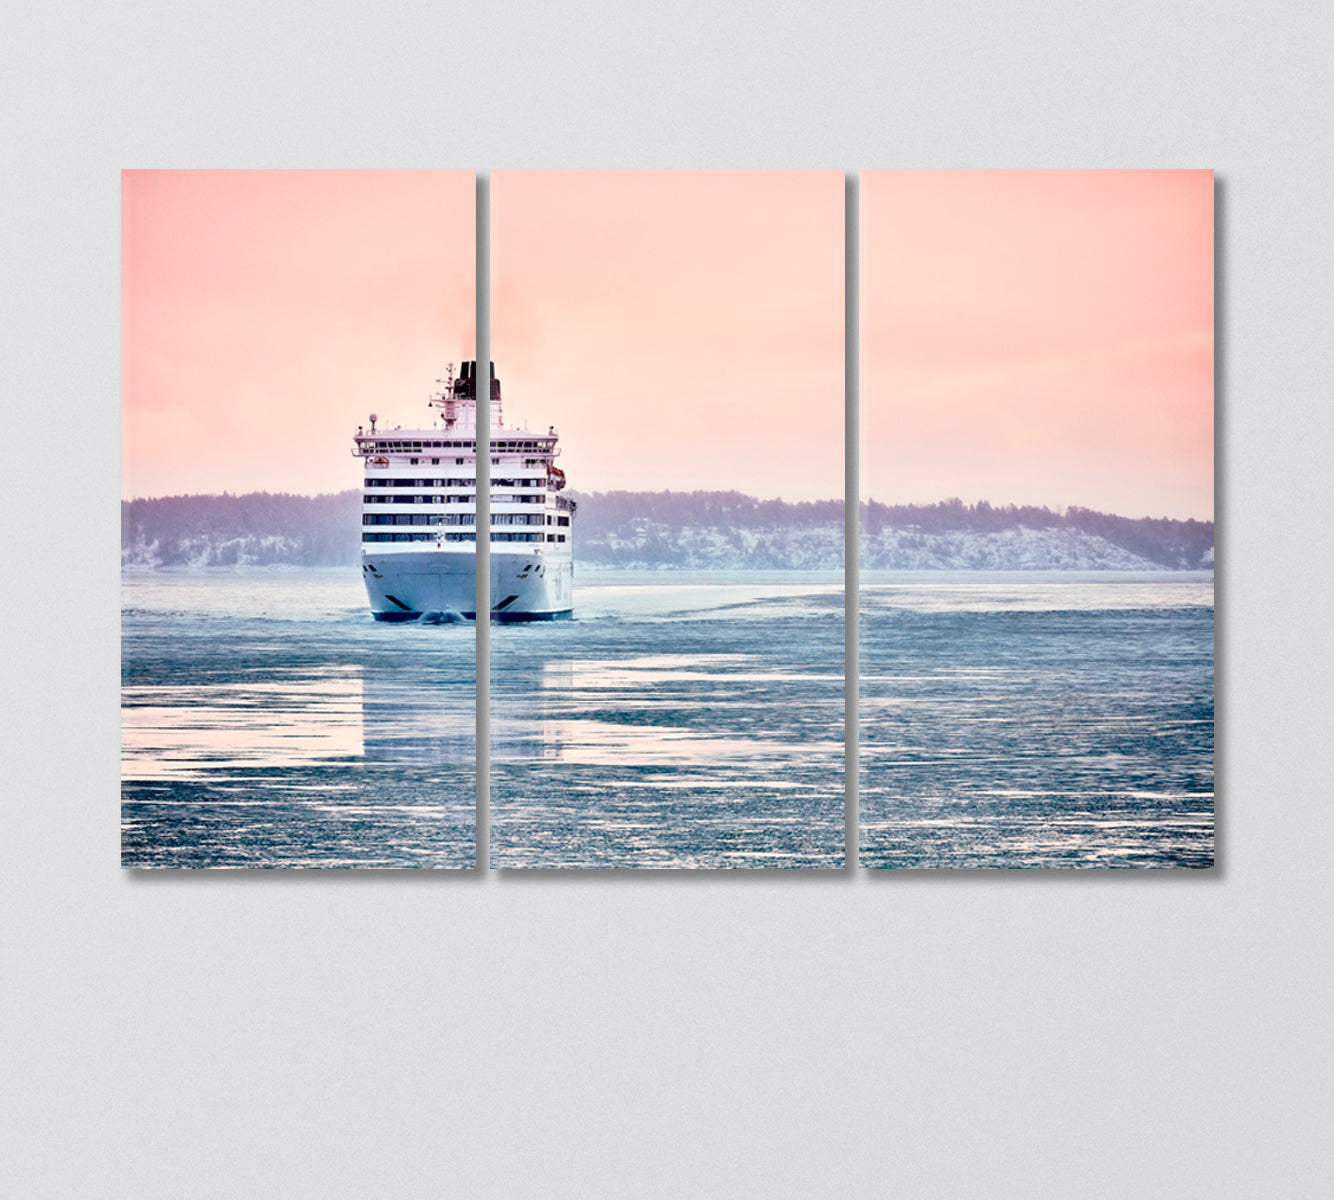 Big White Cruise Liner Ship in the Fjord of Norway Canvas Print-Canvas Print-CetArt-3 Panels-36x24 inches-CetArt